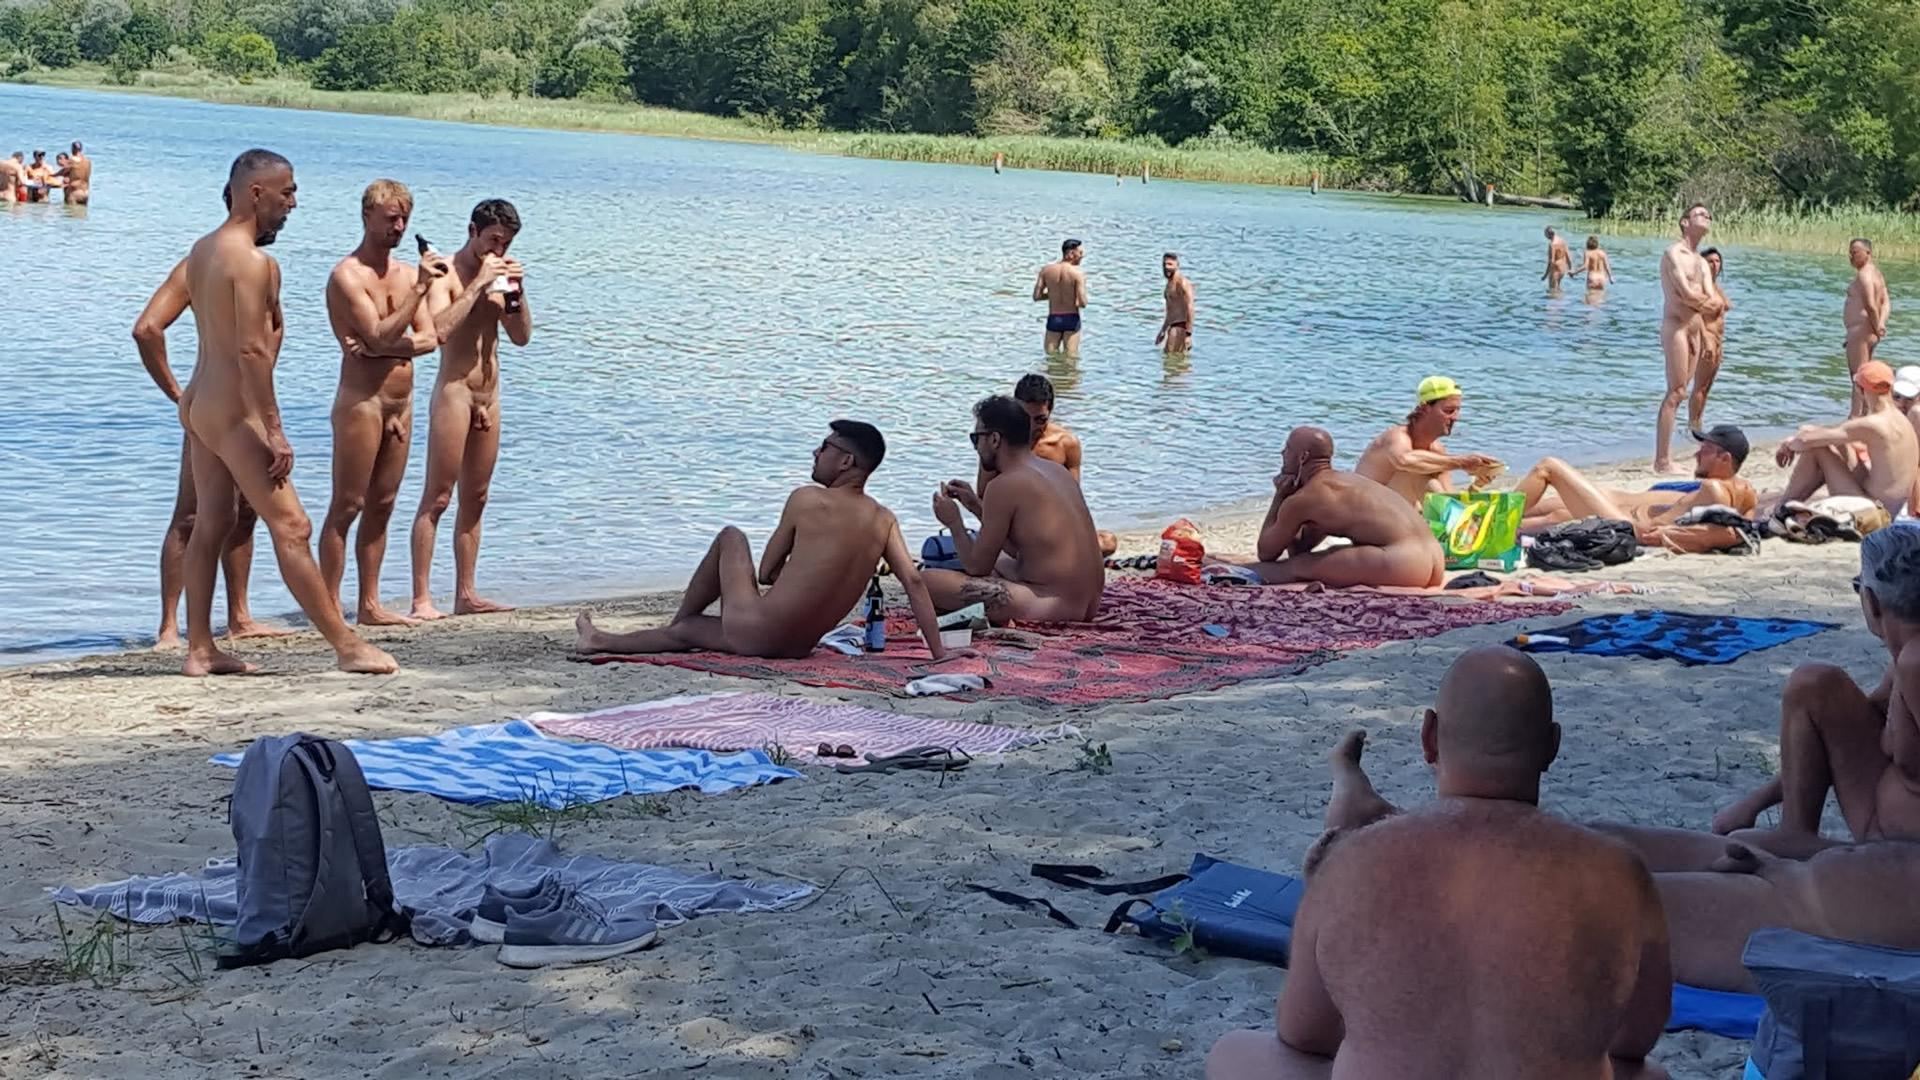 A Bunch of Men at a Nude Beach